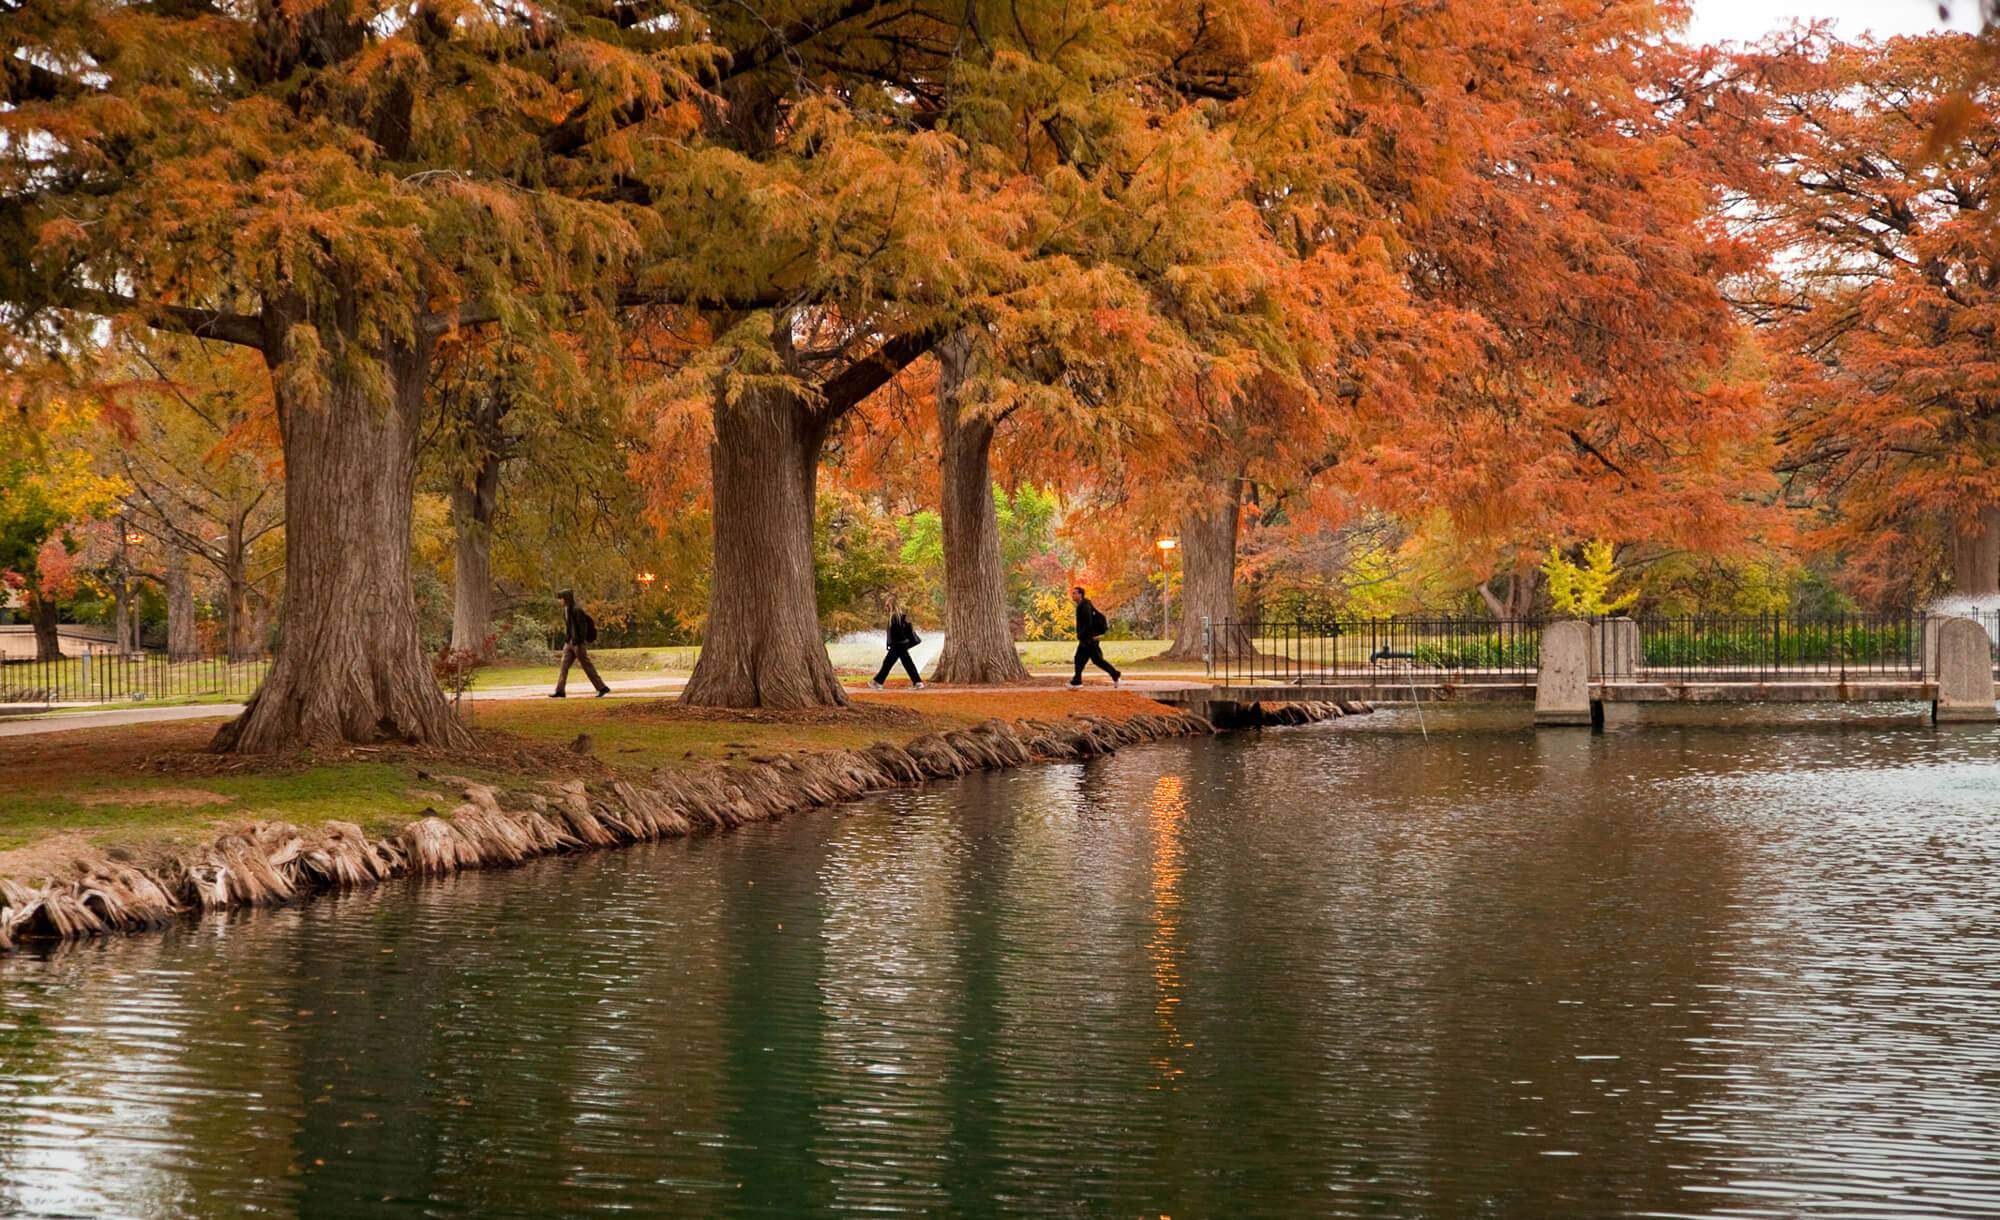 Students walking by a pond during the Autumn season. 